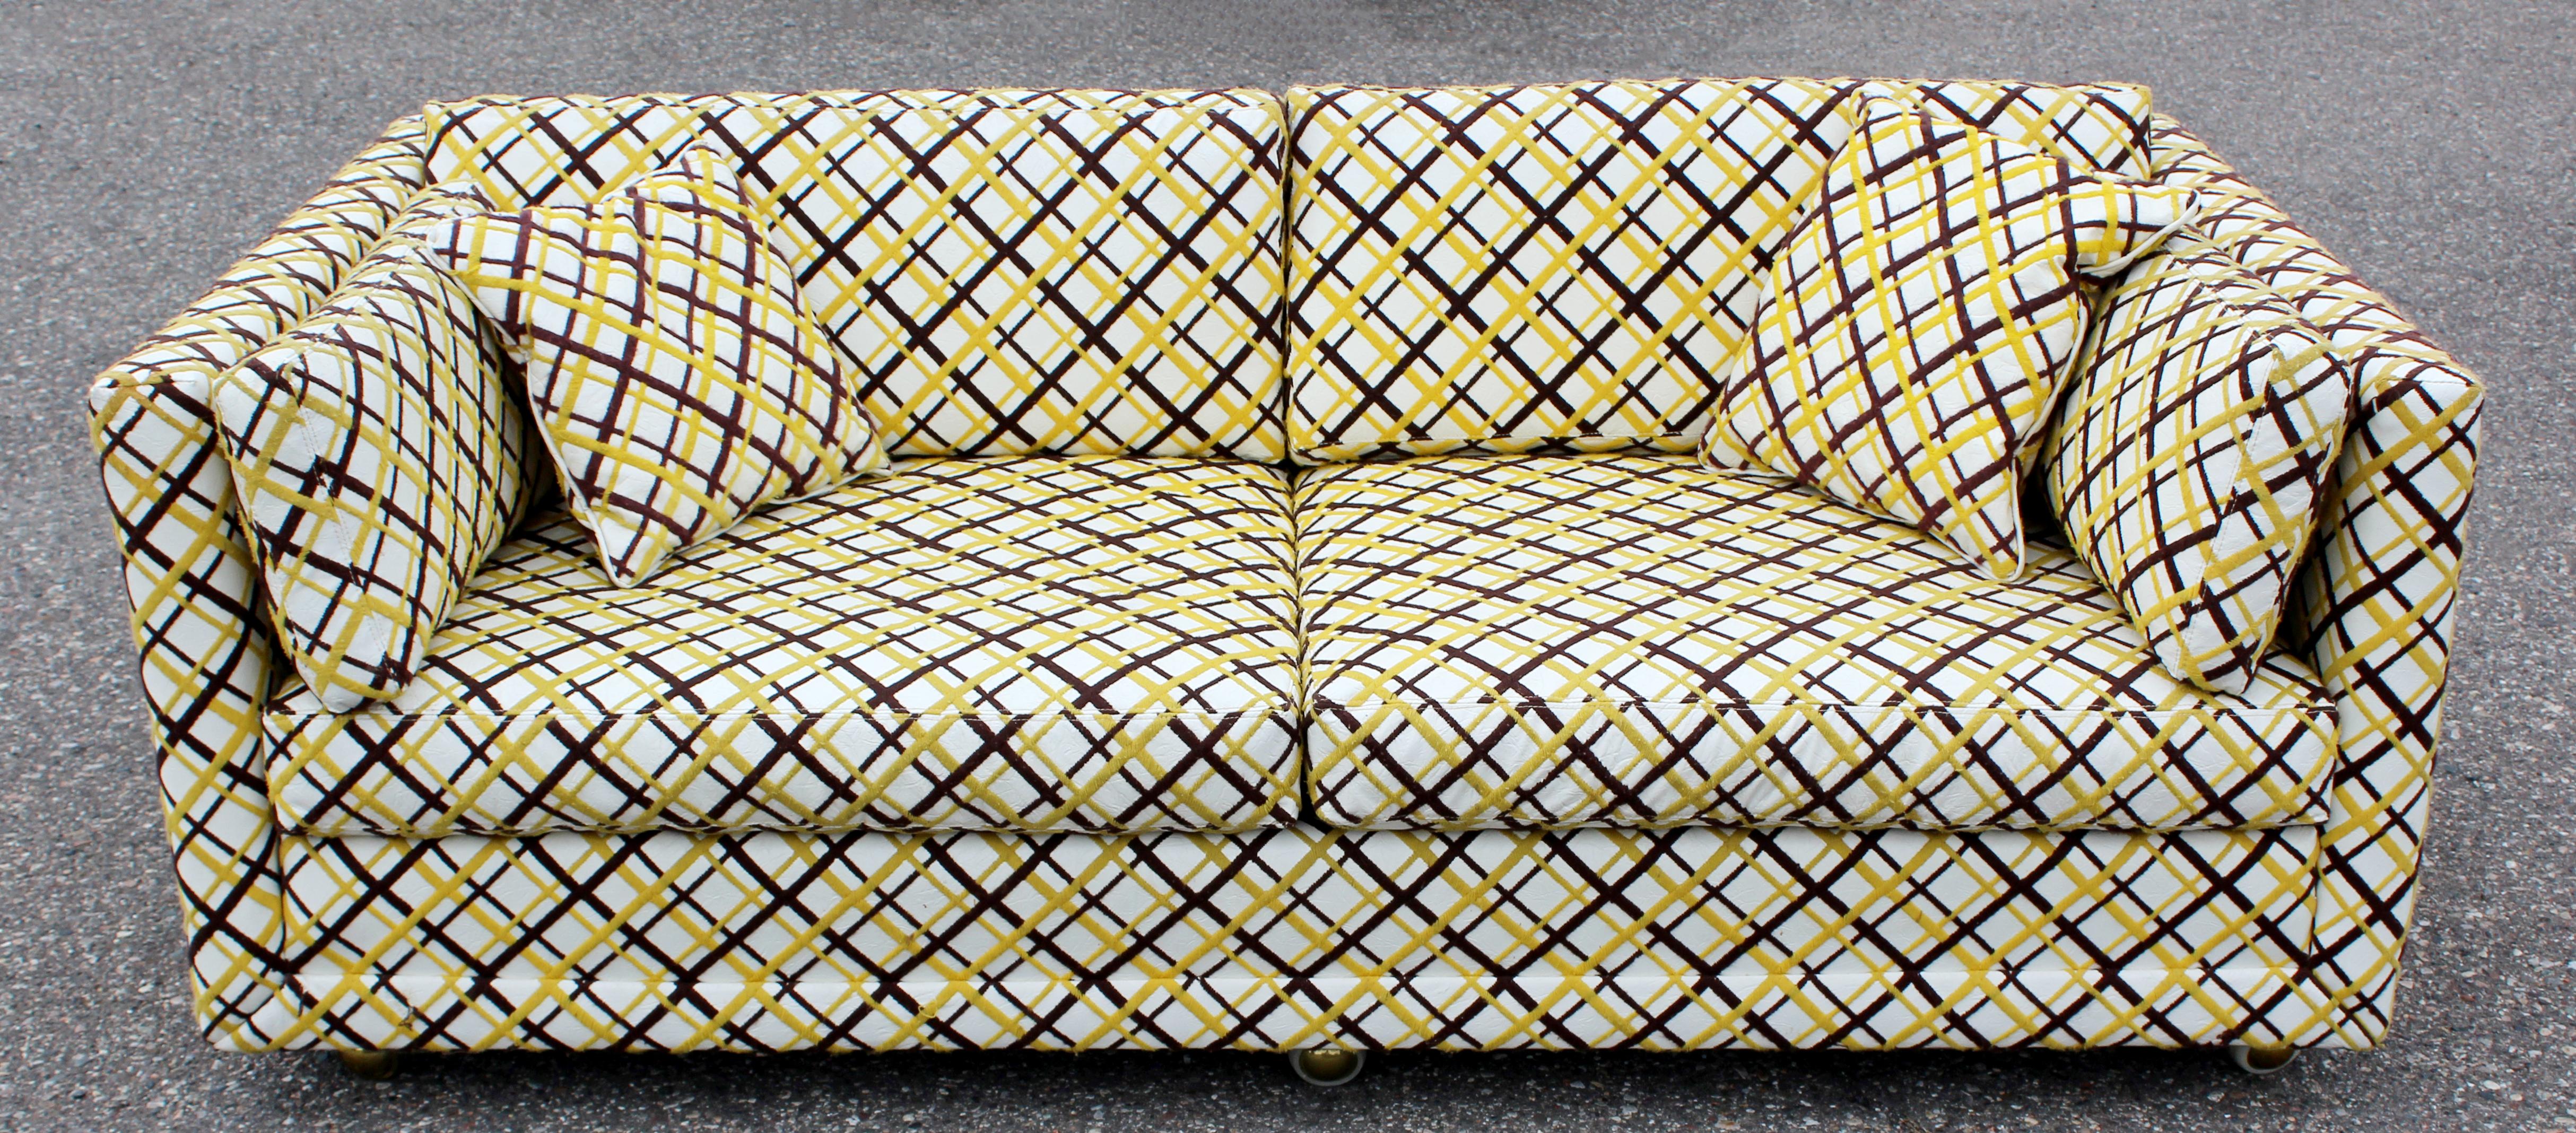 For your consideration is an extraordinary, large loveseat with front casters, upholstered in textured vinyl with a yellow top stitch, by Seemay Inc, in the style of Milo Baughman, circa 1970s. In very good vintage condition. The dimensions are 70